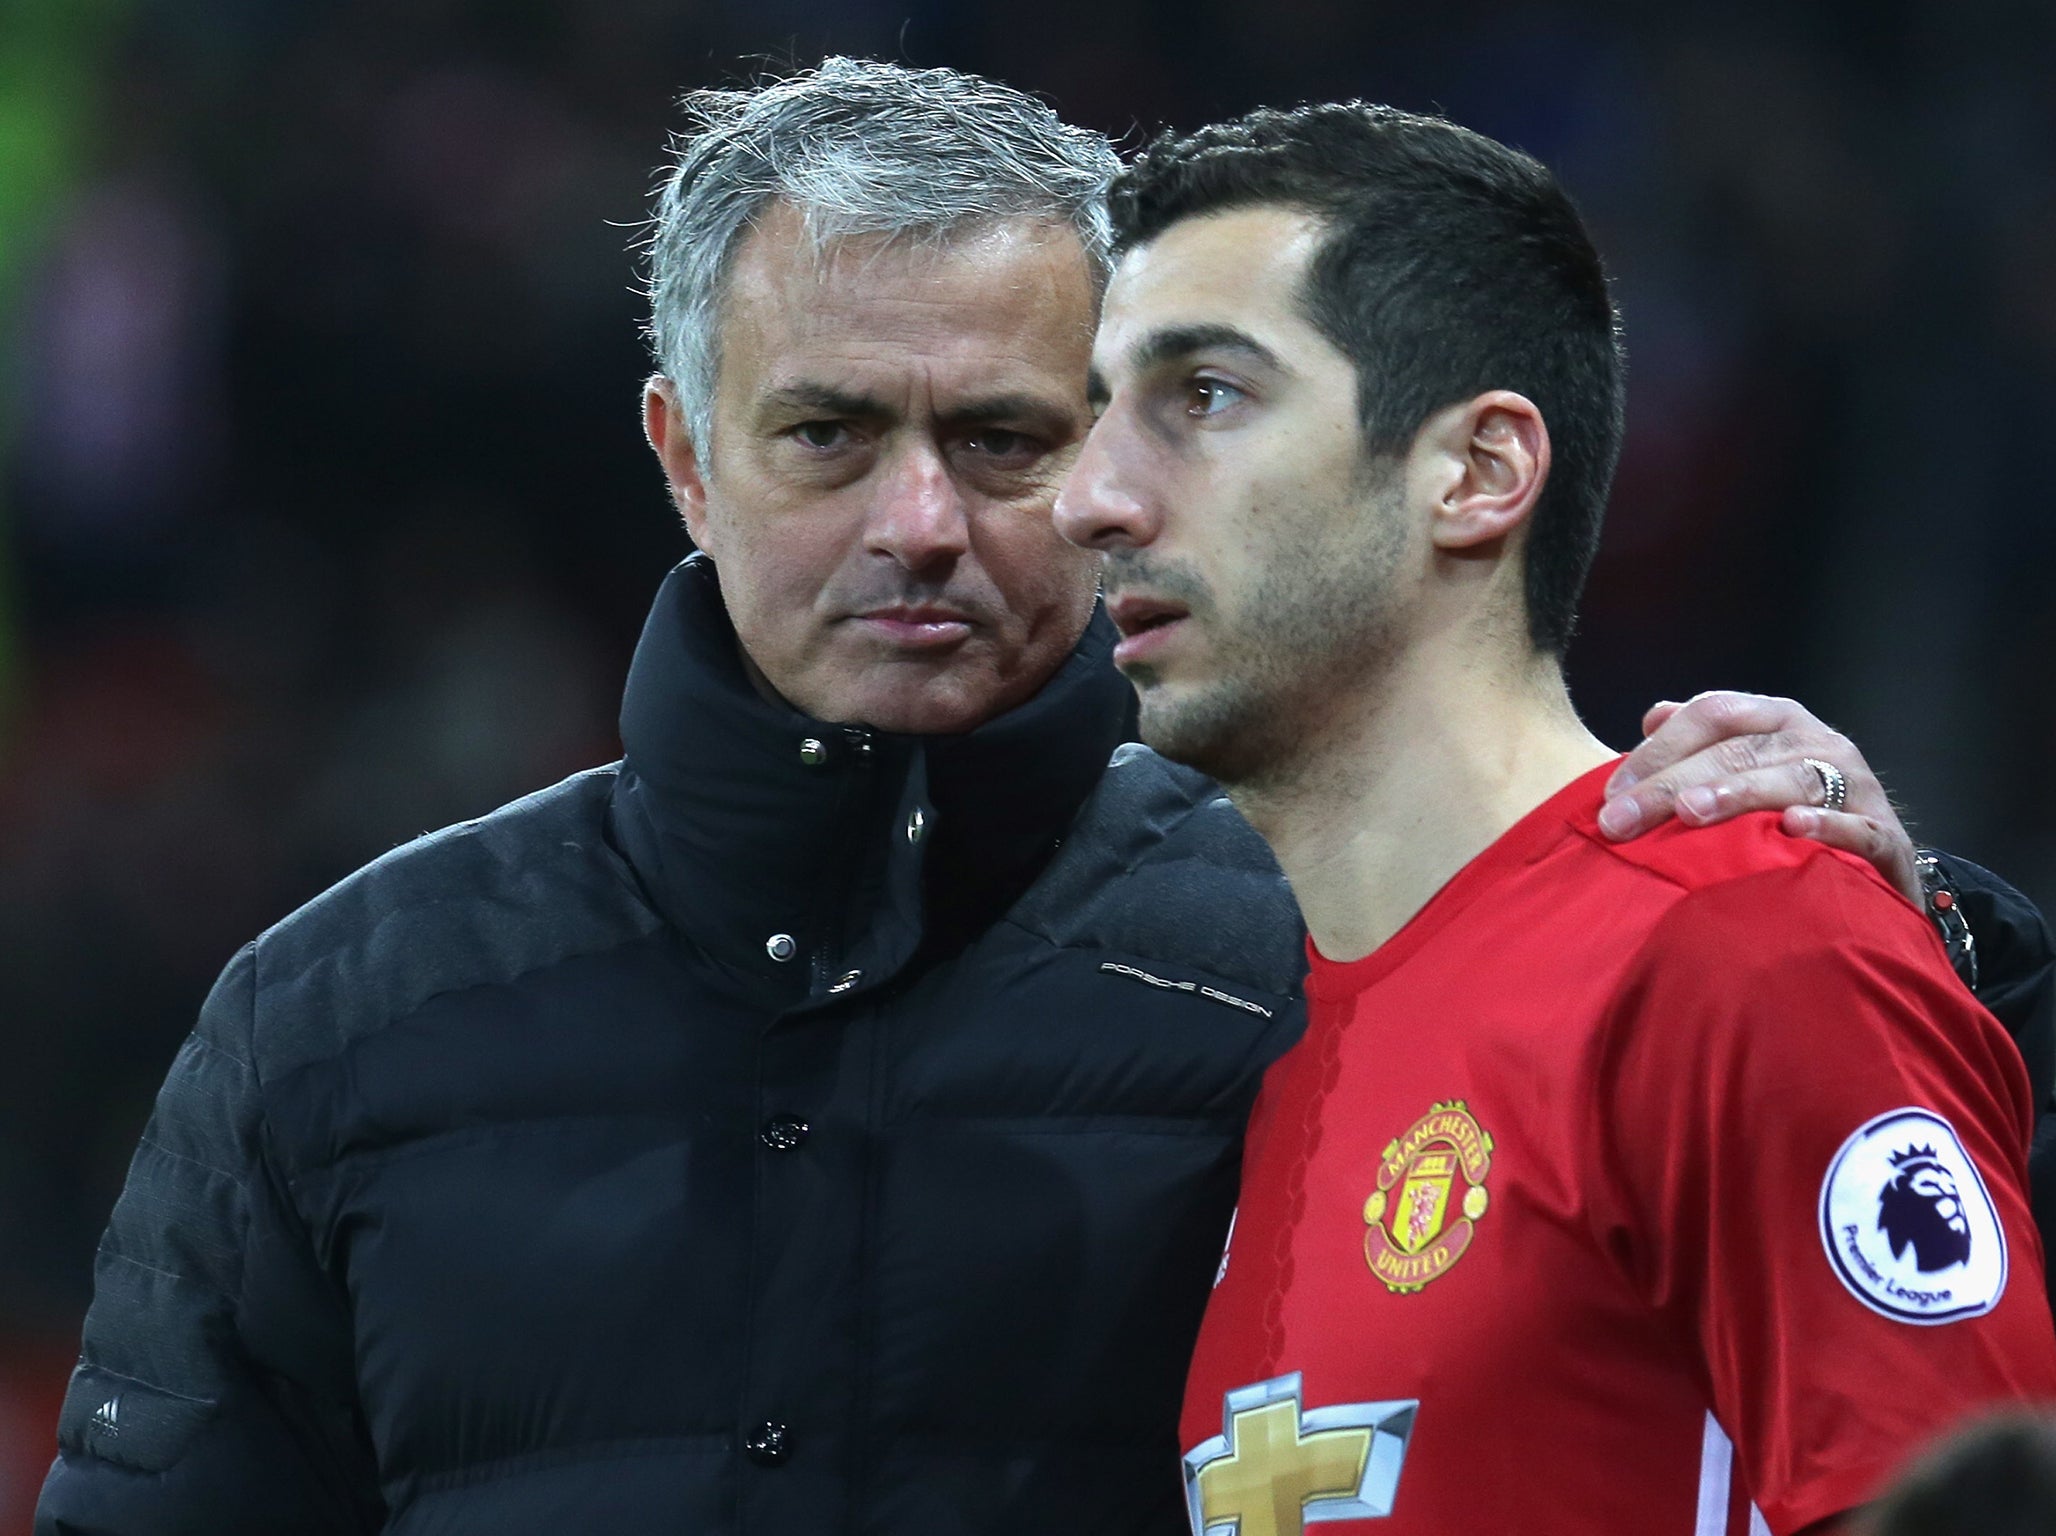 Manchester United manager Jose Mourinho plays down talk of a rift with Henrikh Mkhitaryan